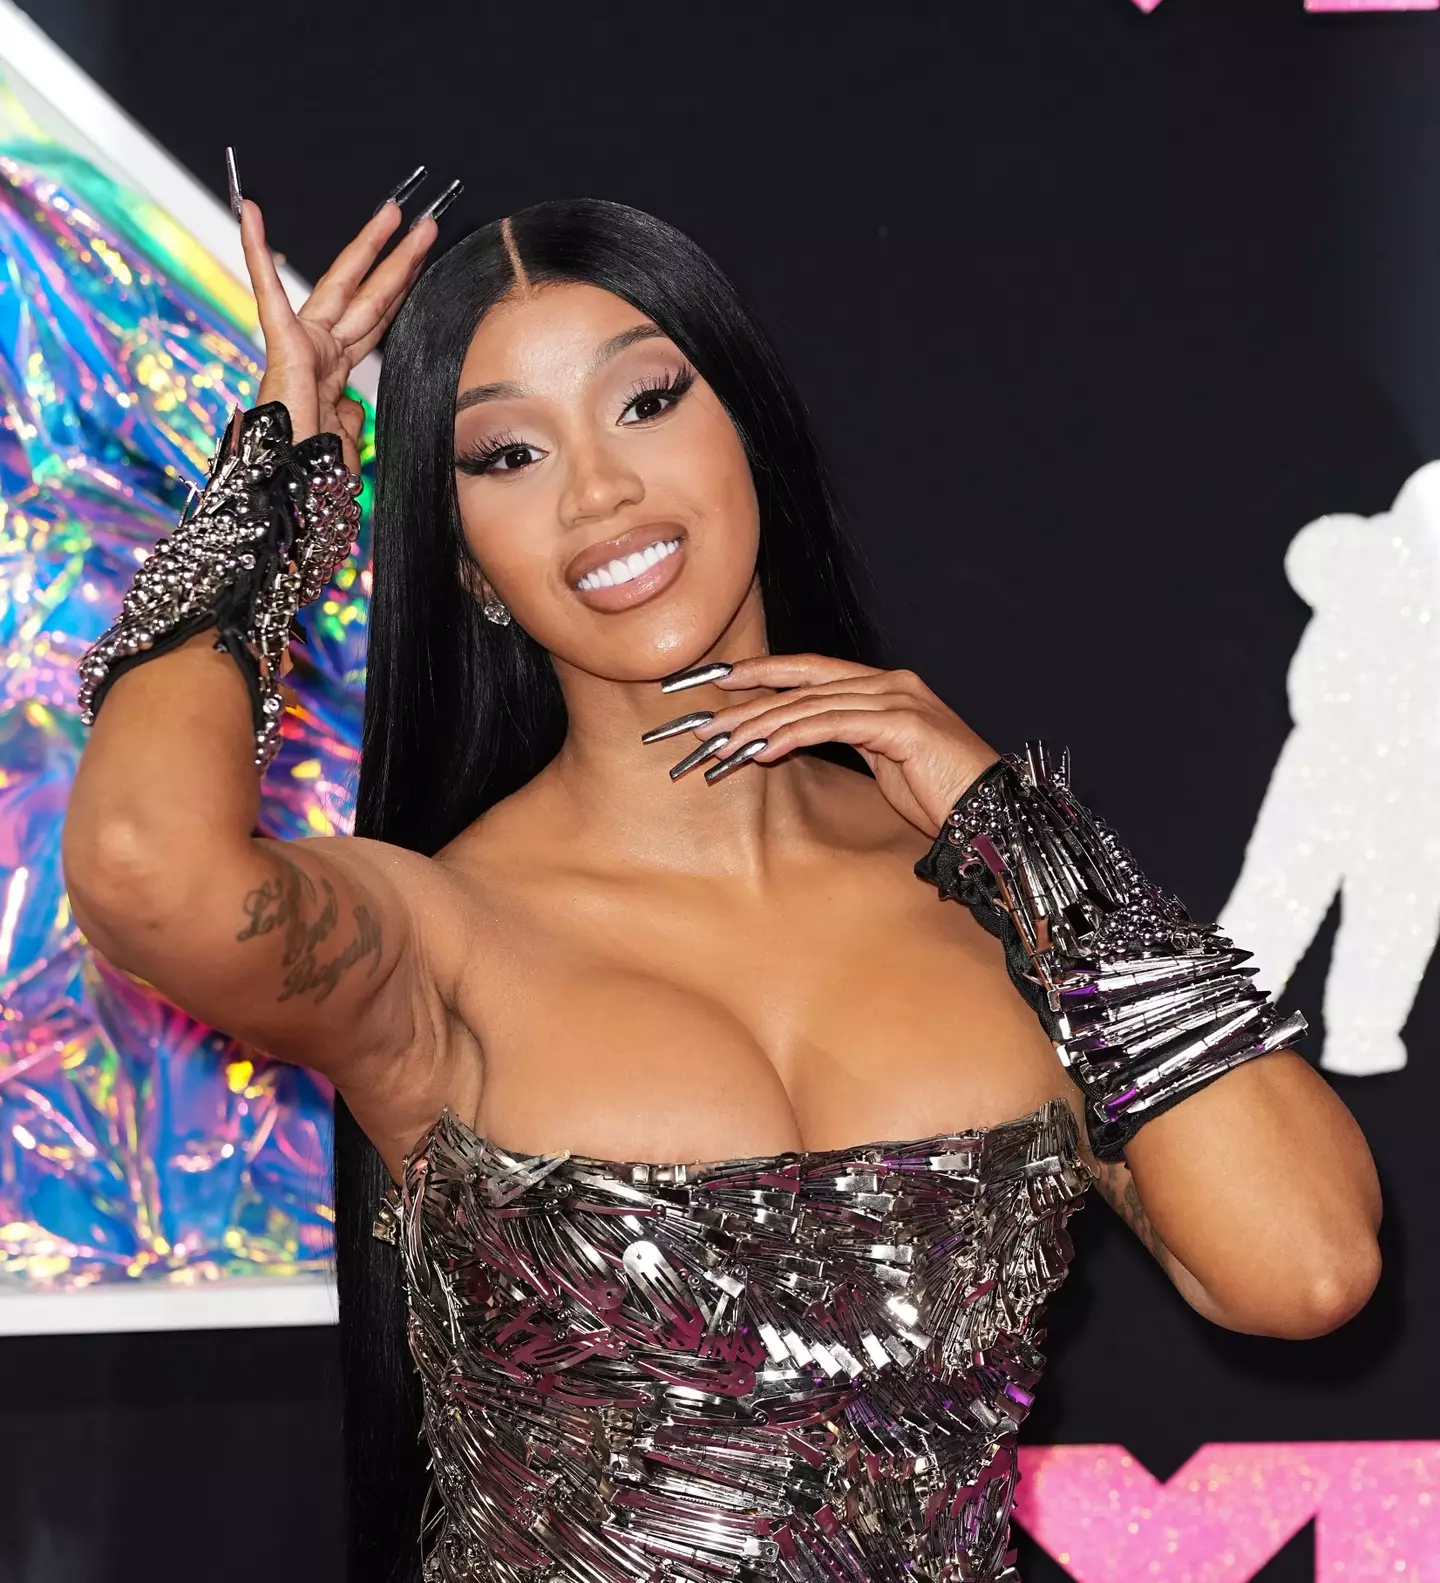 Cardi B is the second highest earner on OnlyFans.